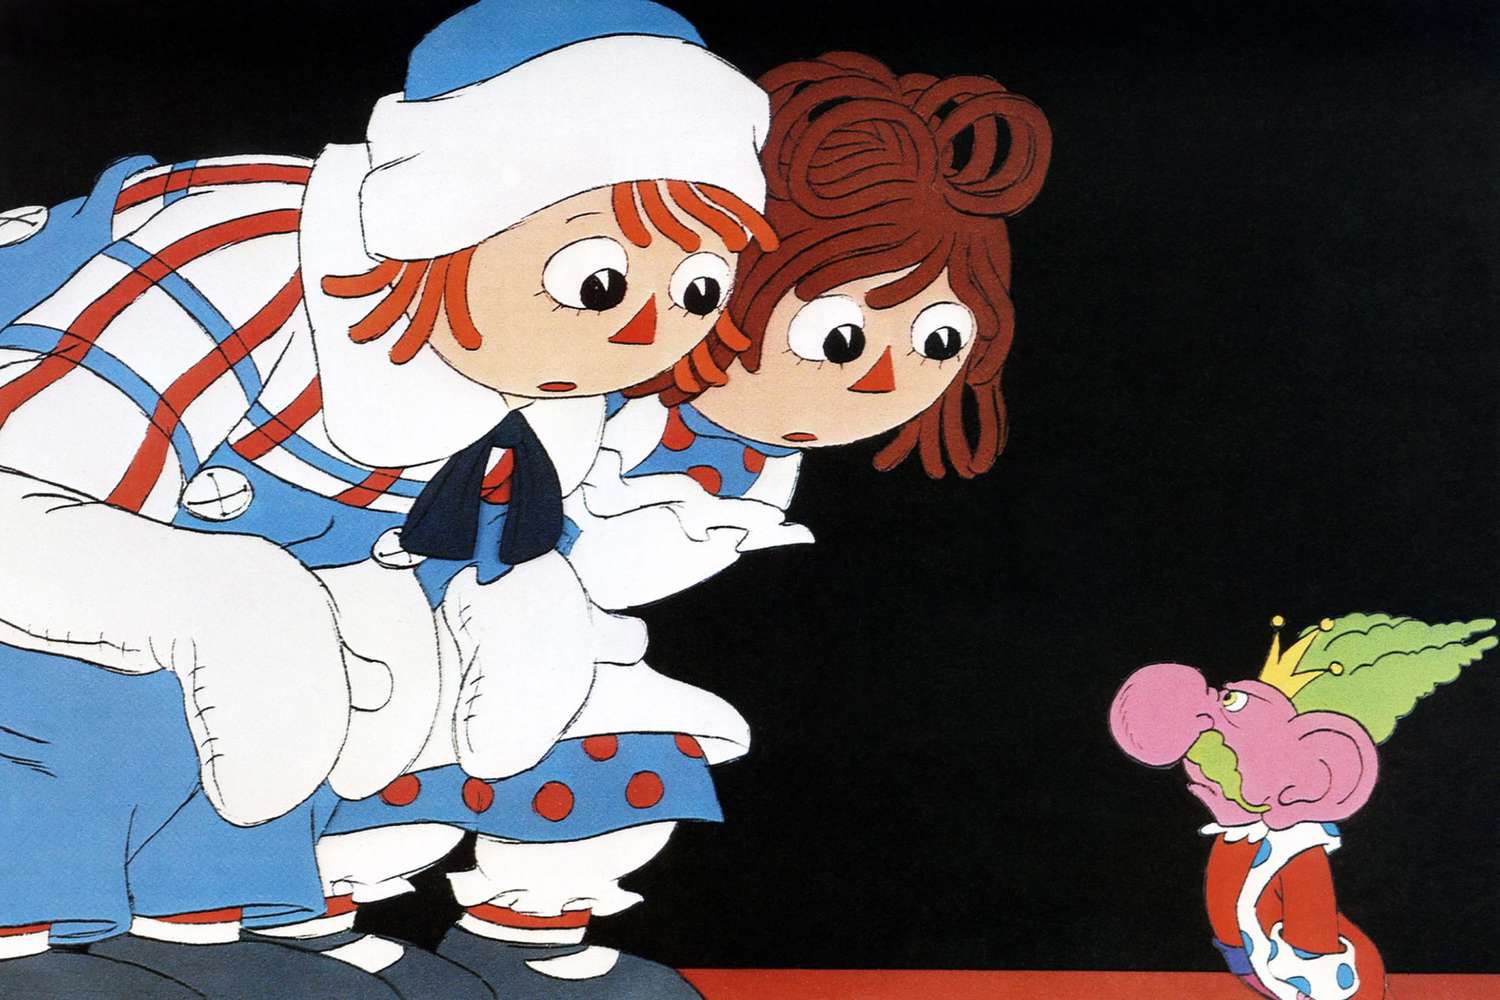 RAGGEDY ANN & ANDY: A MUSICAL ADVENTURE, from left: Raggedy Andy, Raggedy Ann, King Koo Koo, 1977. &copy;